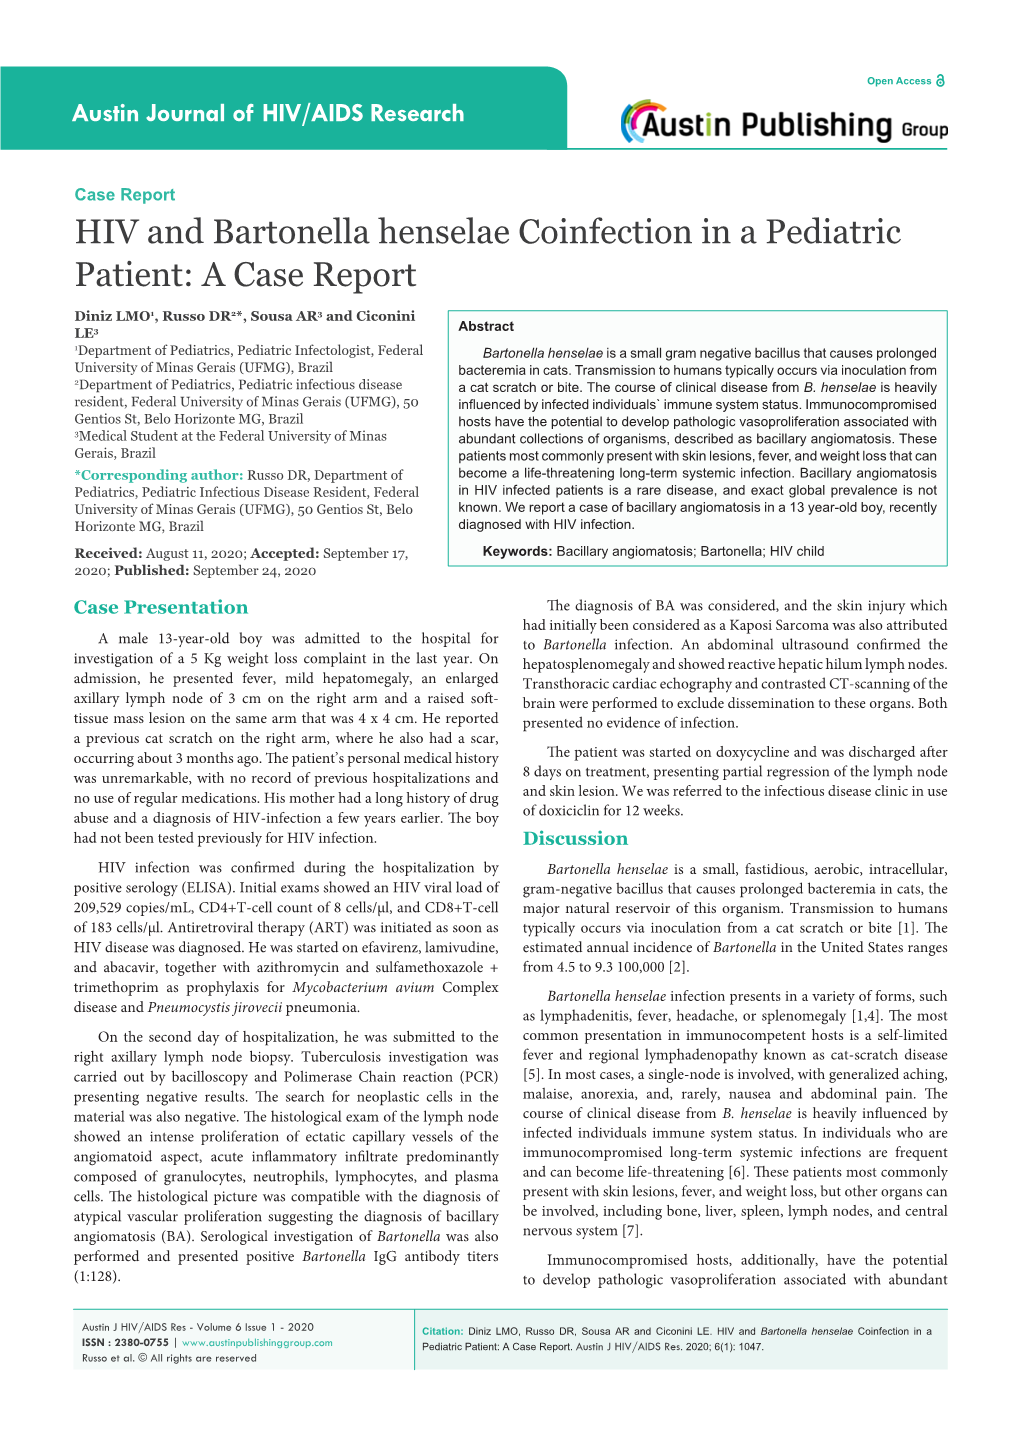 HIV and Bartonella Henselae Coinfection in a Pediatric Patient: a Case Report